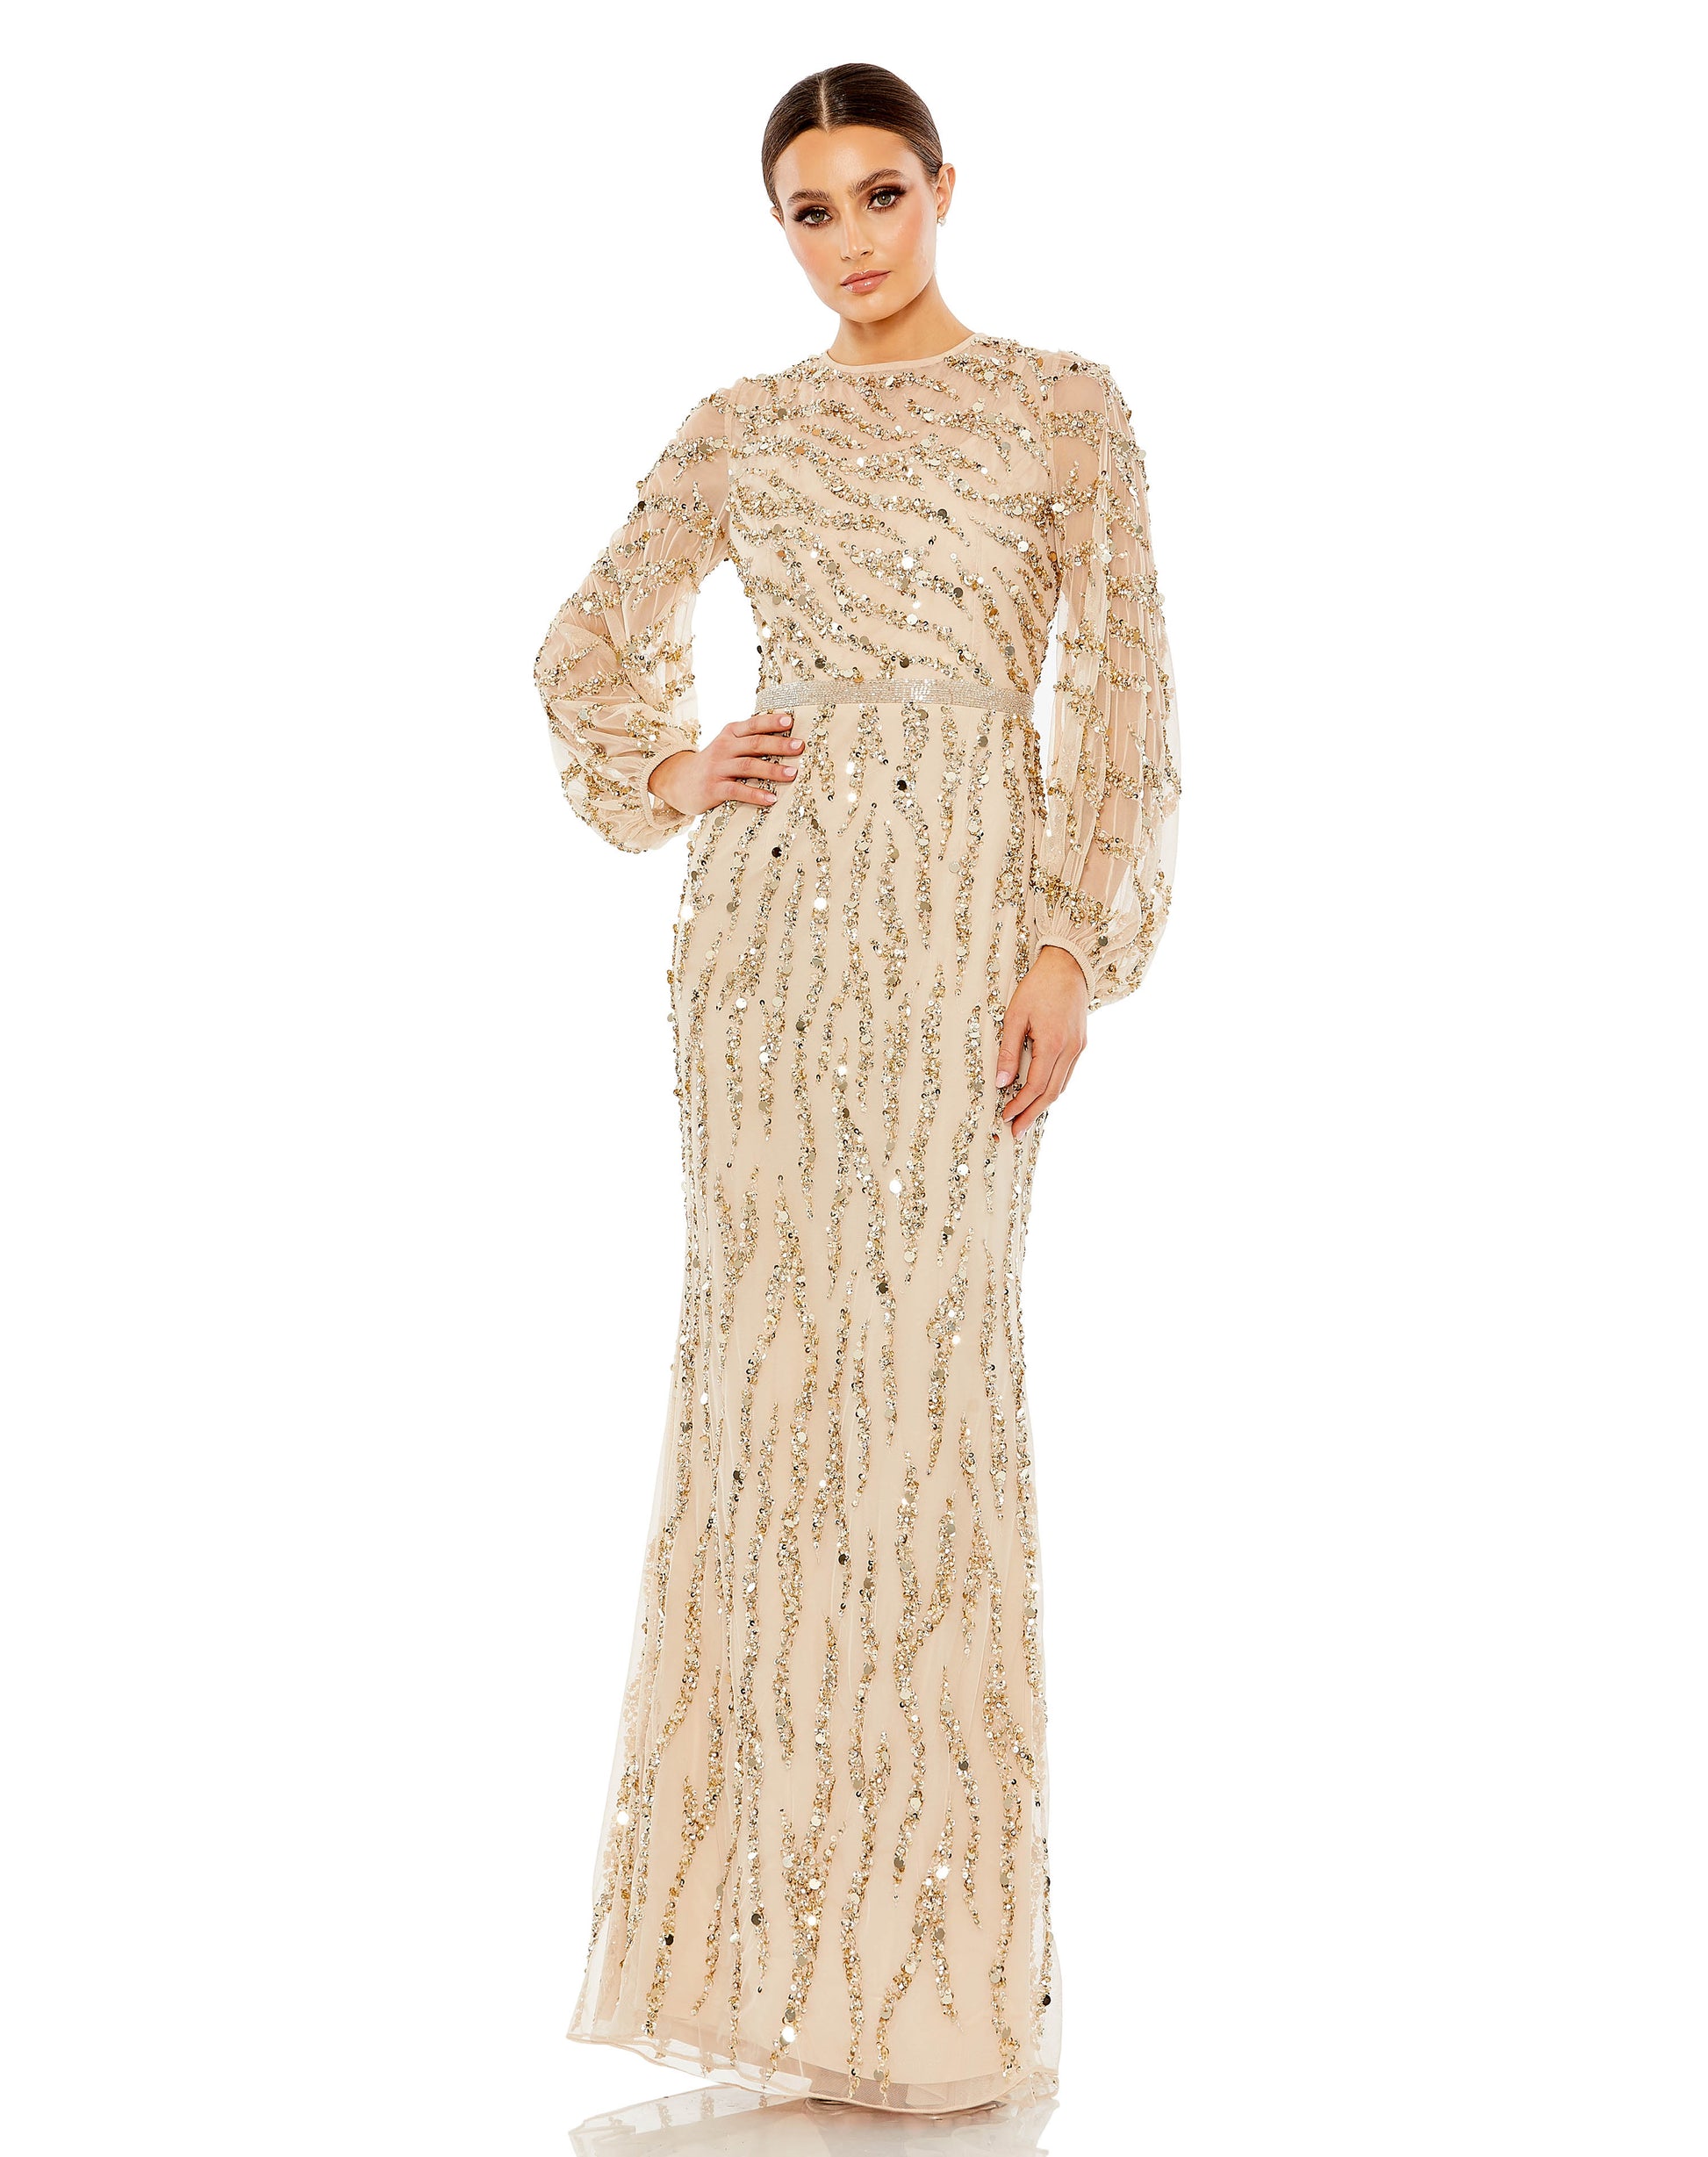 Mac Duggal Hand embellished mesh overlay; 100% polyester lining Partially lined bodice; fully lined skirt; sheer unlined sleeves Illusion high neckline Long puff sleeves Allover delicate sequined pattern Hand beaded waist detail Concealed back zipper Appr